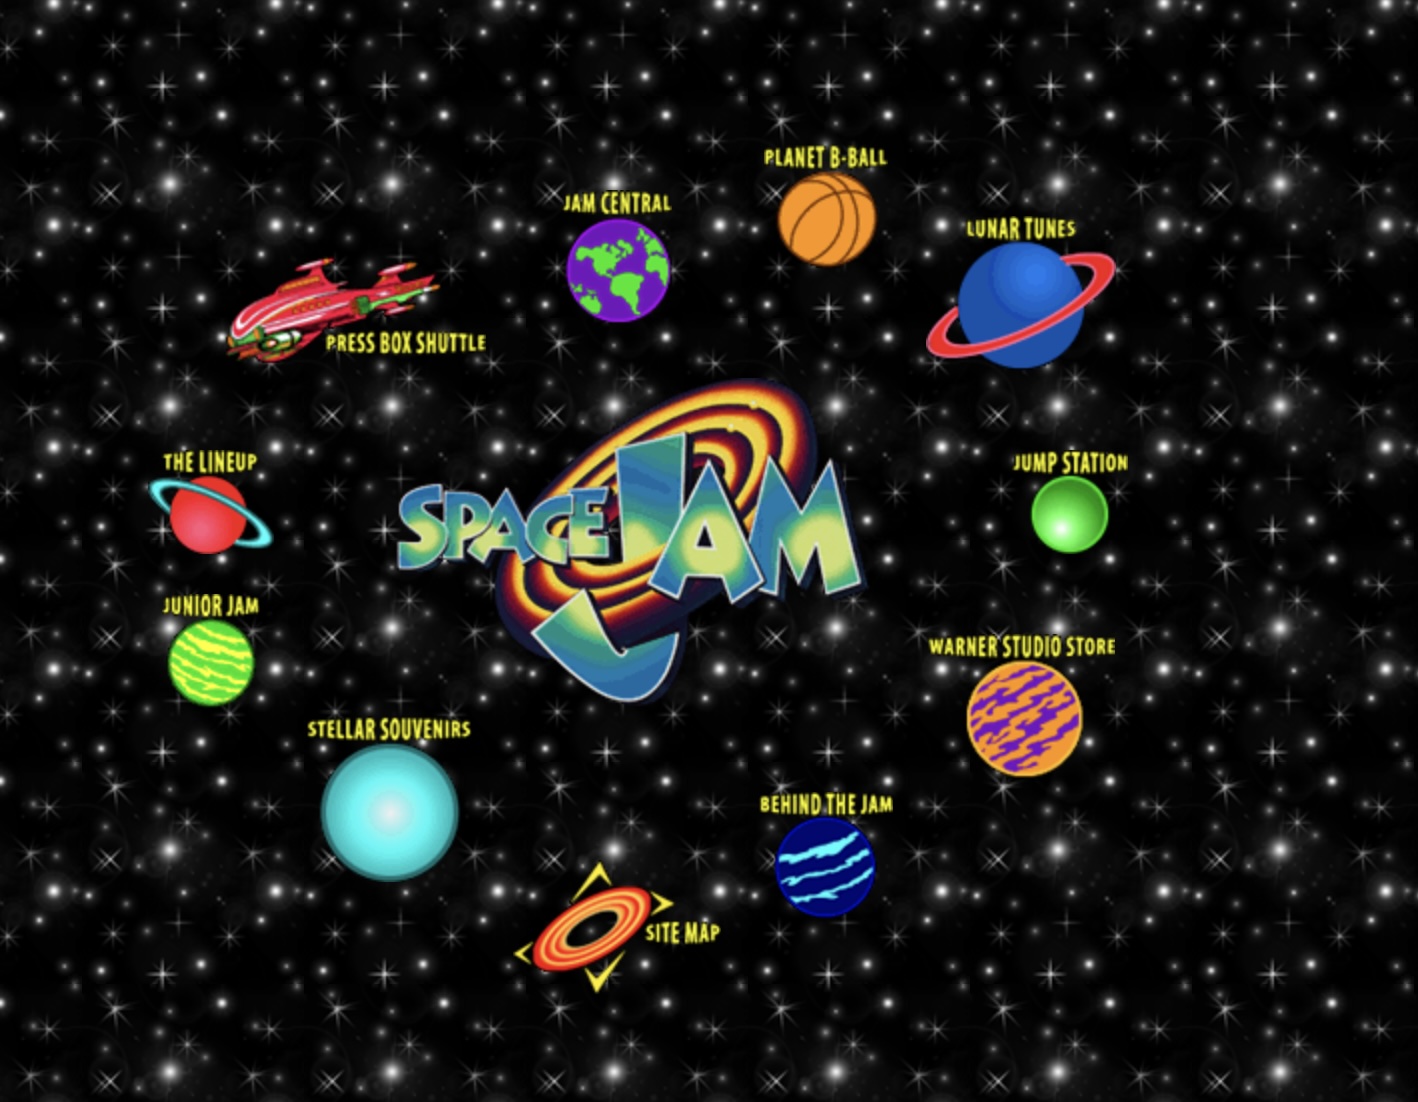 space jam 1996 website homepage still available online